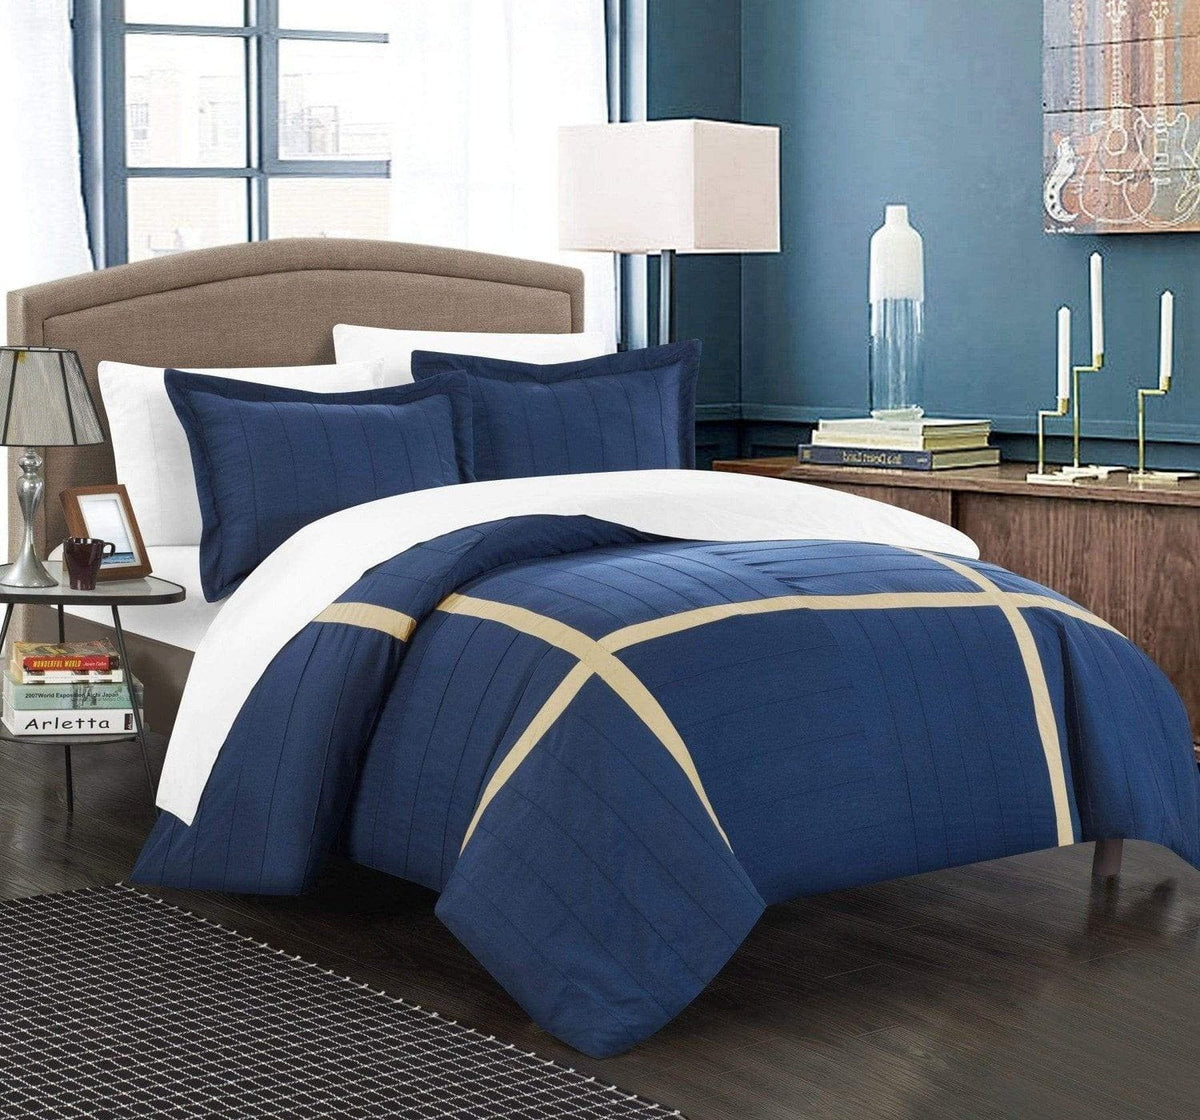 Chic Home Giselle 3 Piece Patchwork Duvet Cover Set Navy